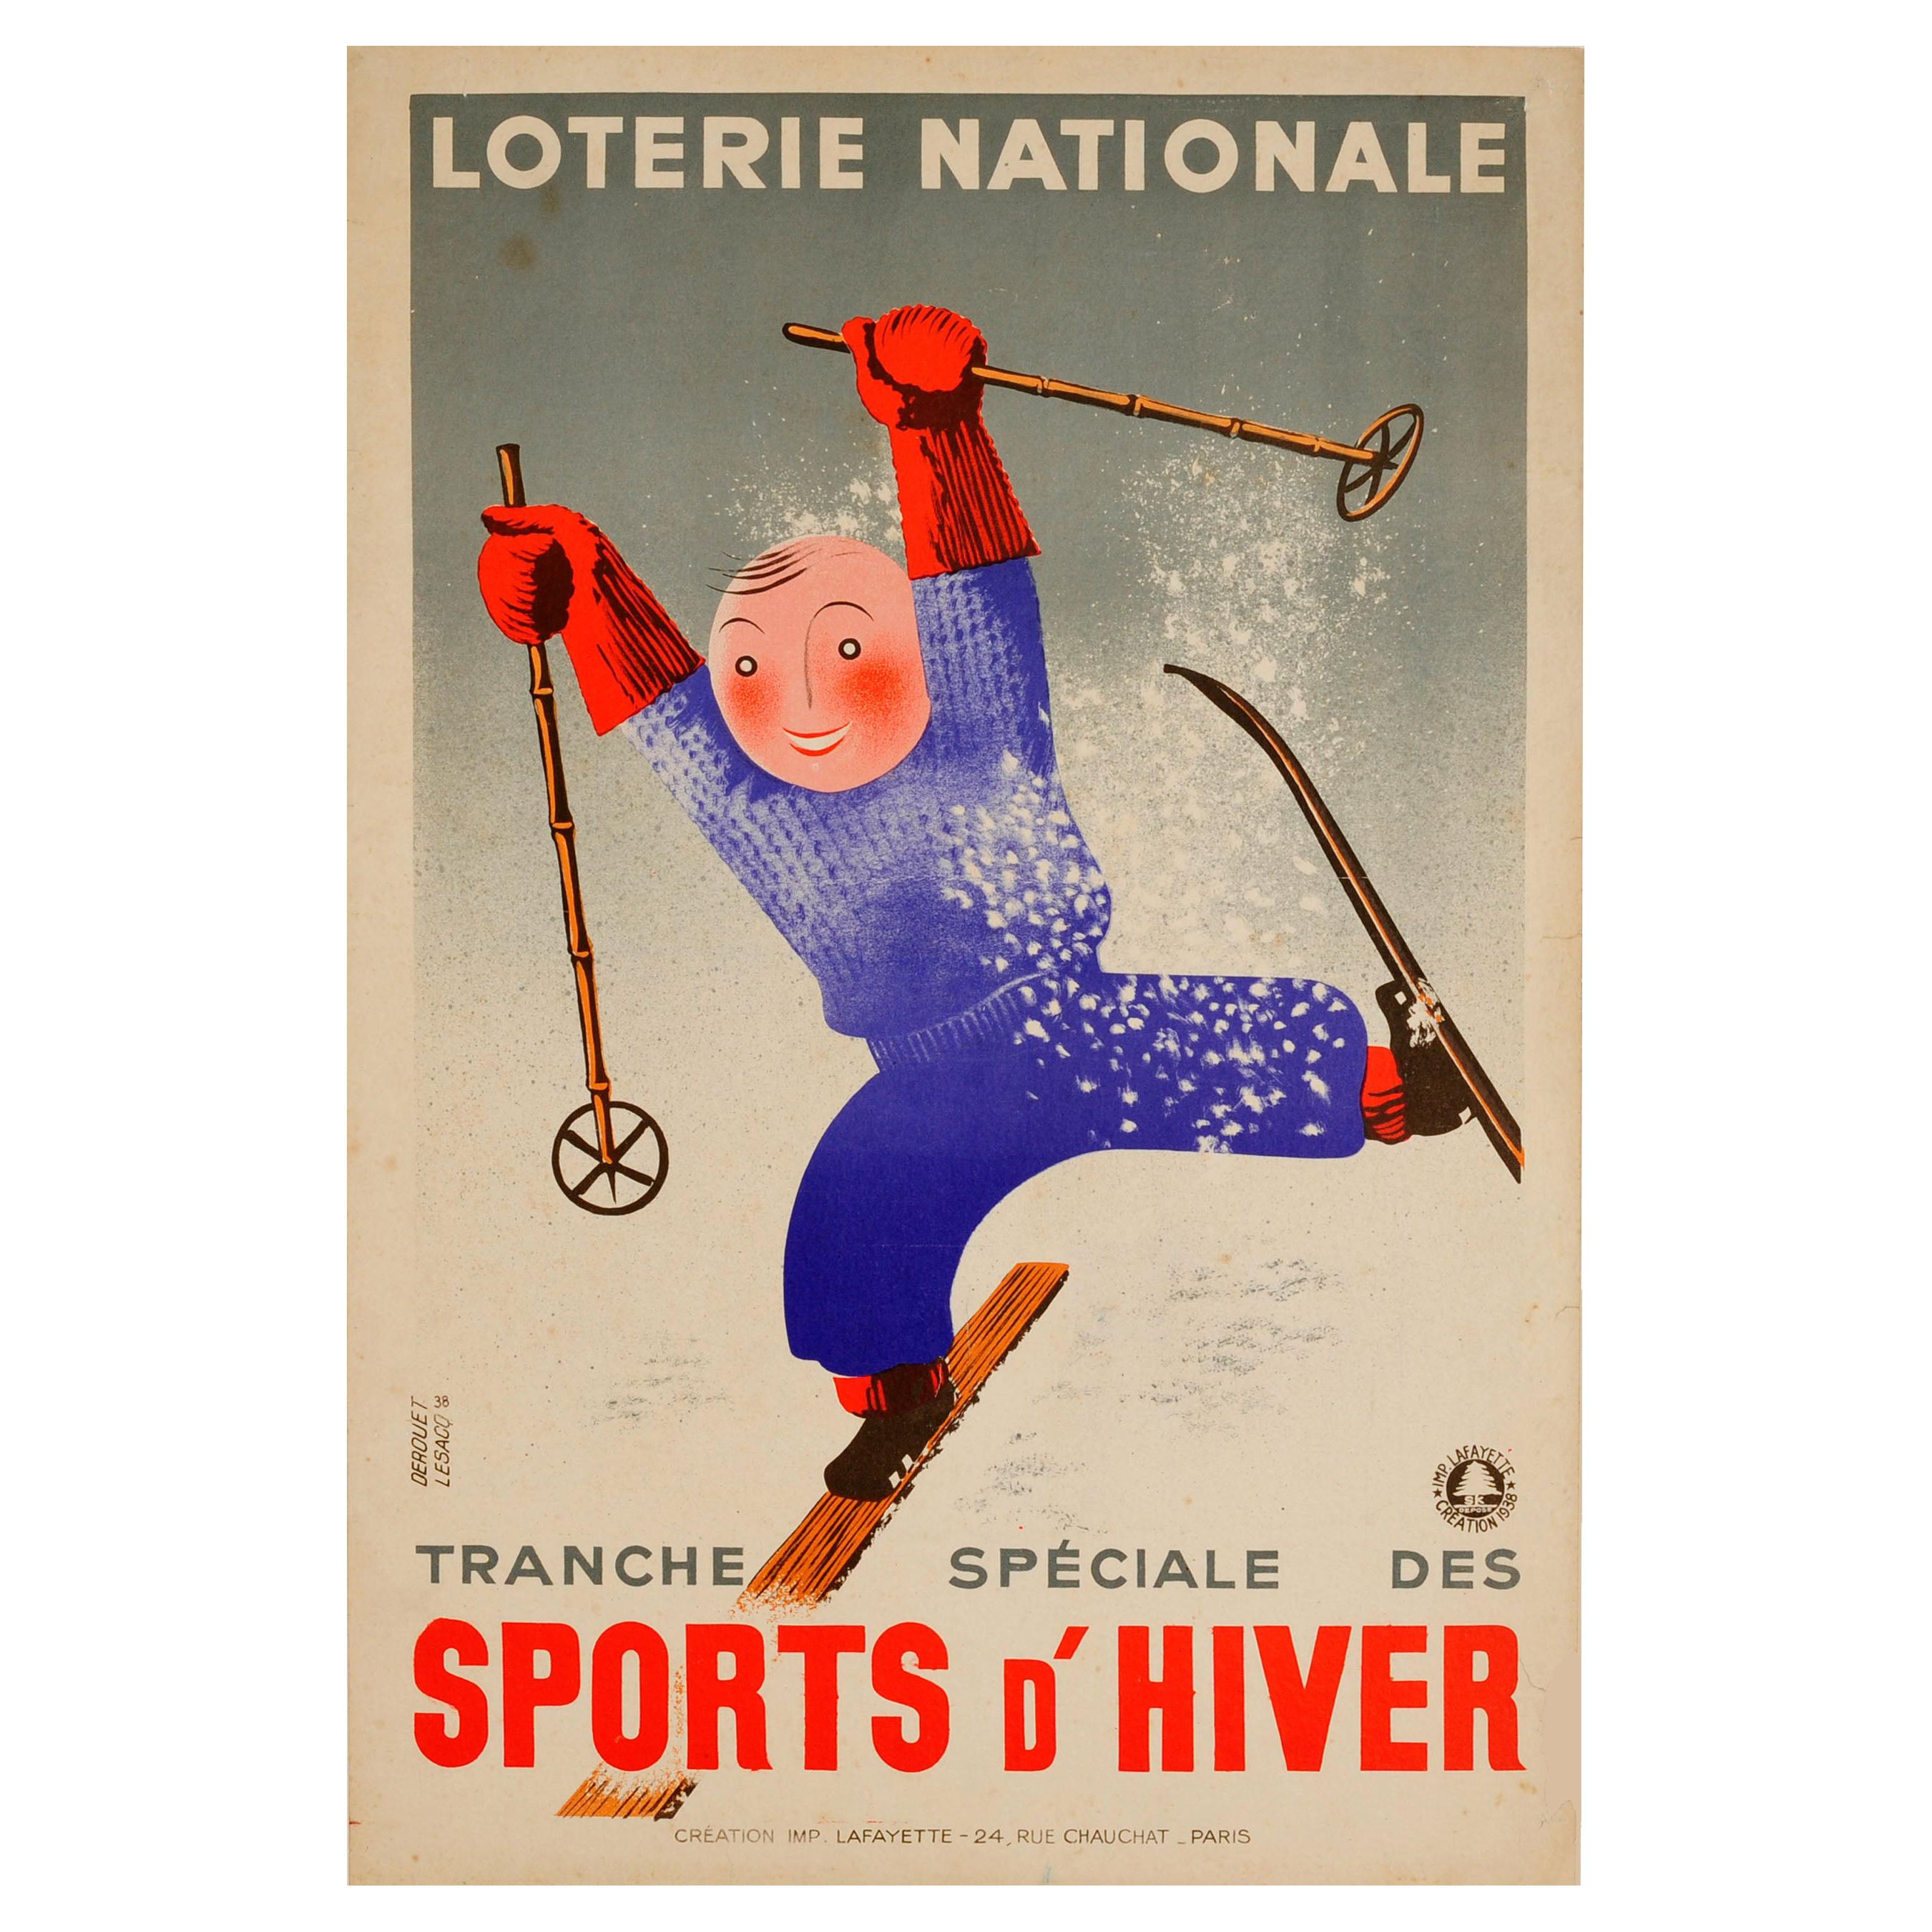 Original Vintage Lottery Poster Loterie Nationale Winter Sports d'Hiver Skiing